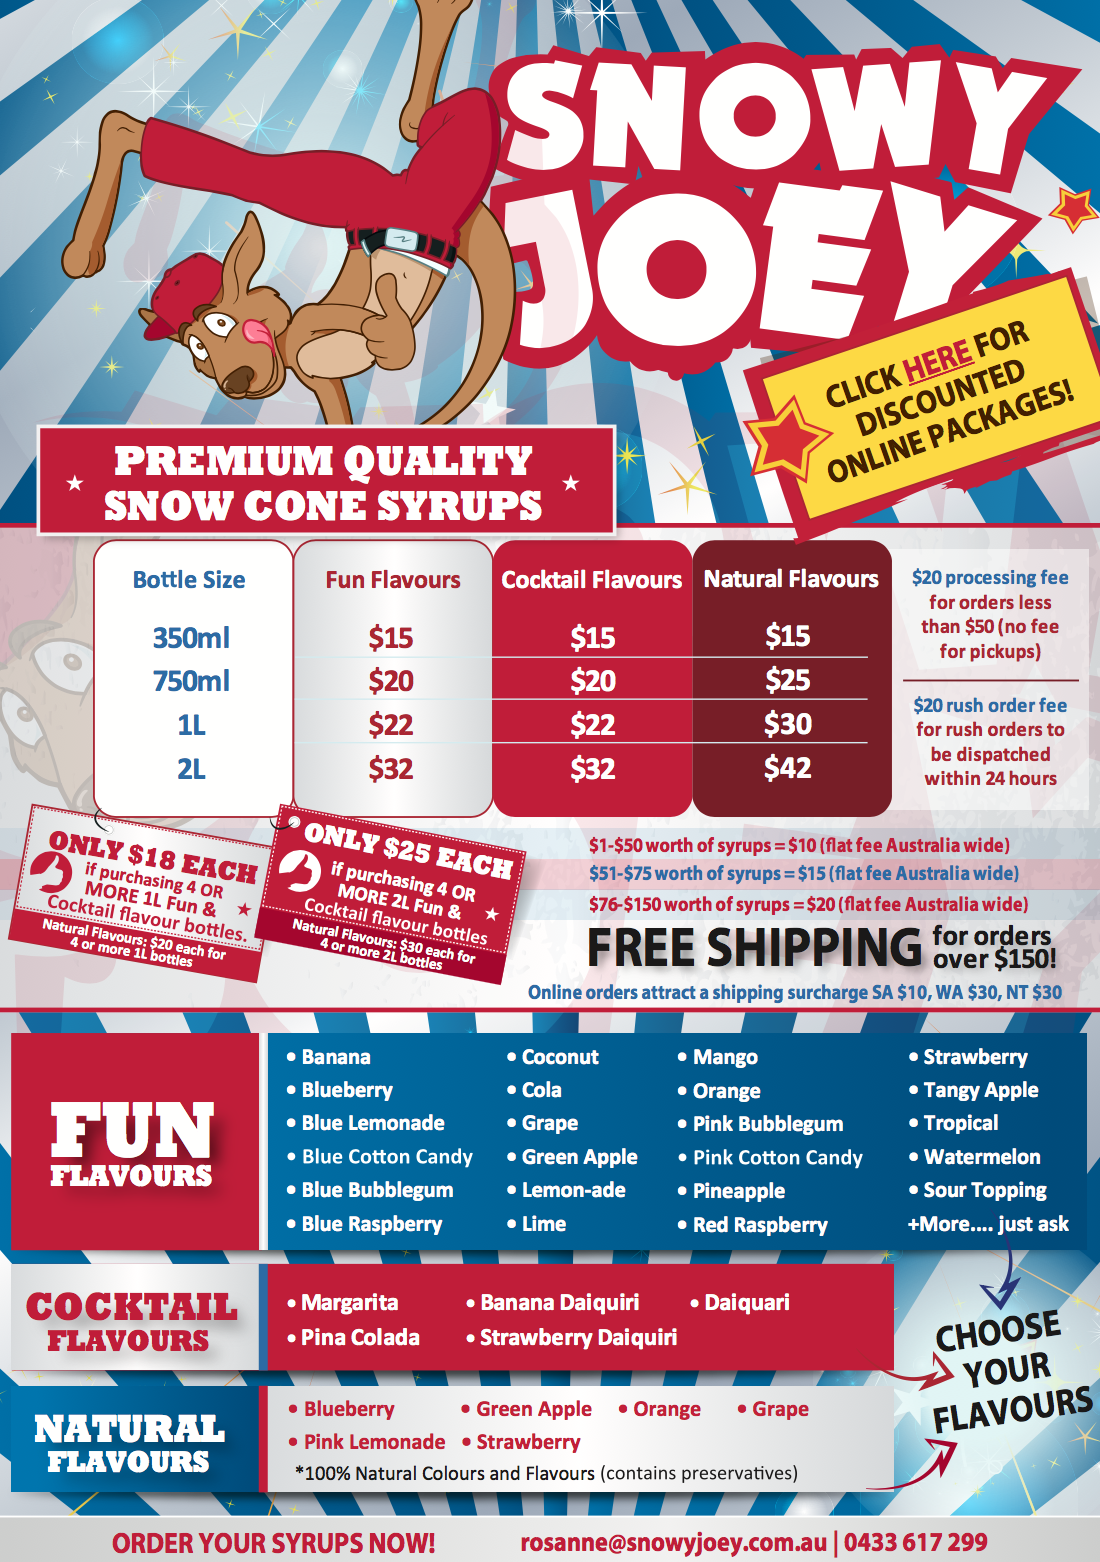 Screenshot showing a flyer for Snowy Joey